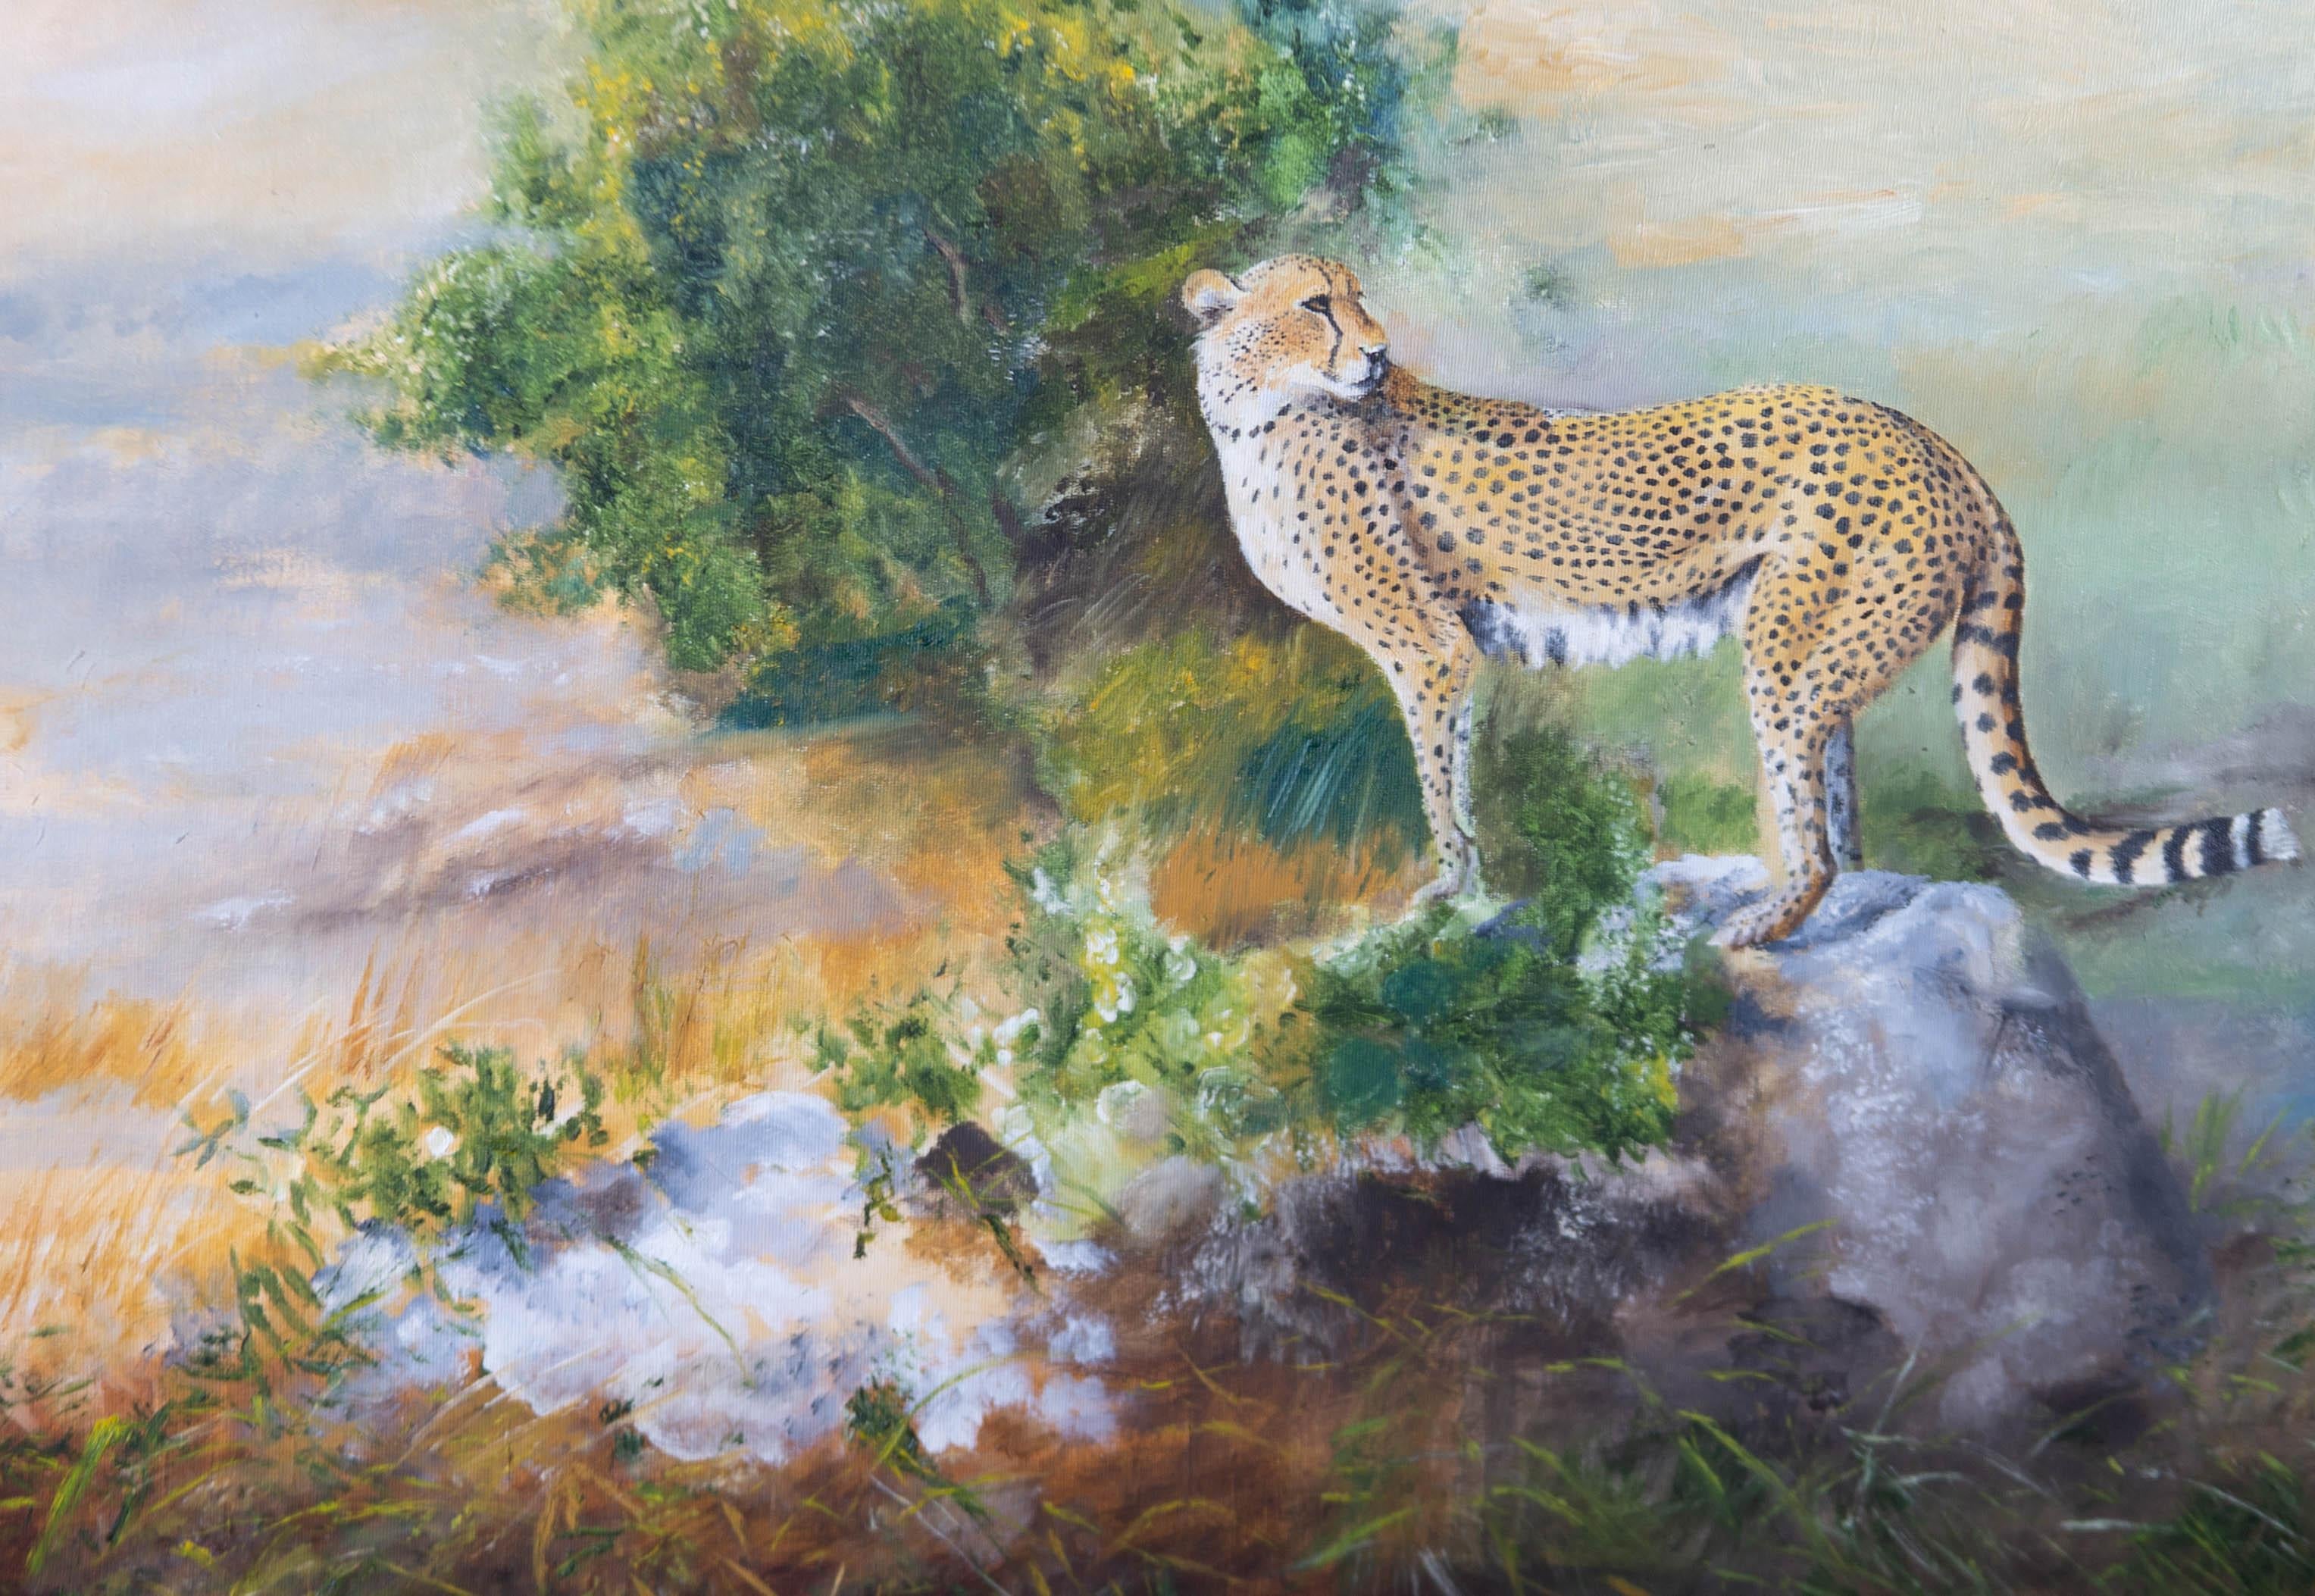 A dramatic contemporary oil, showing a majestic leopard atop a rock in the shrub of the Savannah. The clouds and yellow light, suggest that a great rain storm has just passed overhead. The painting is on canvas and there is an exhibition label with